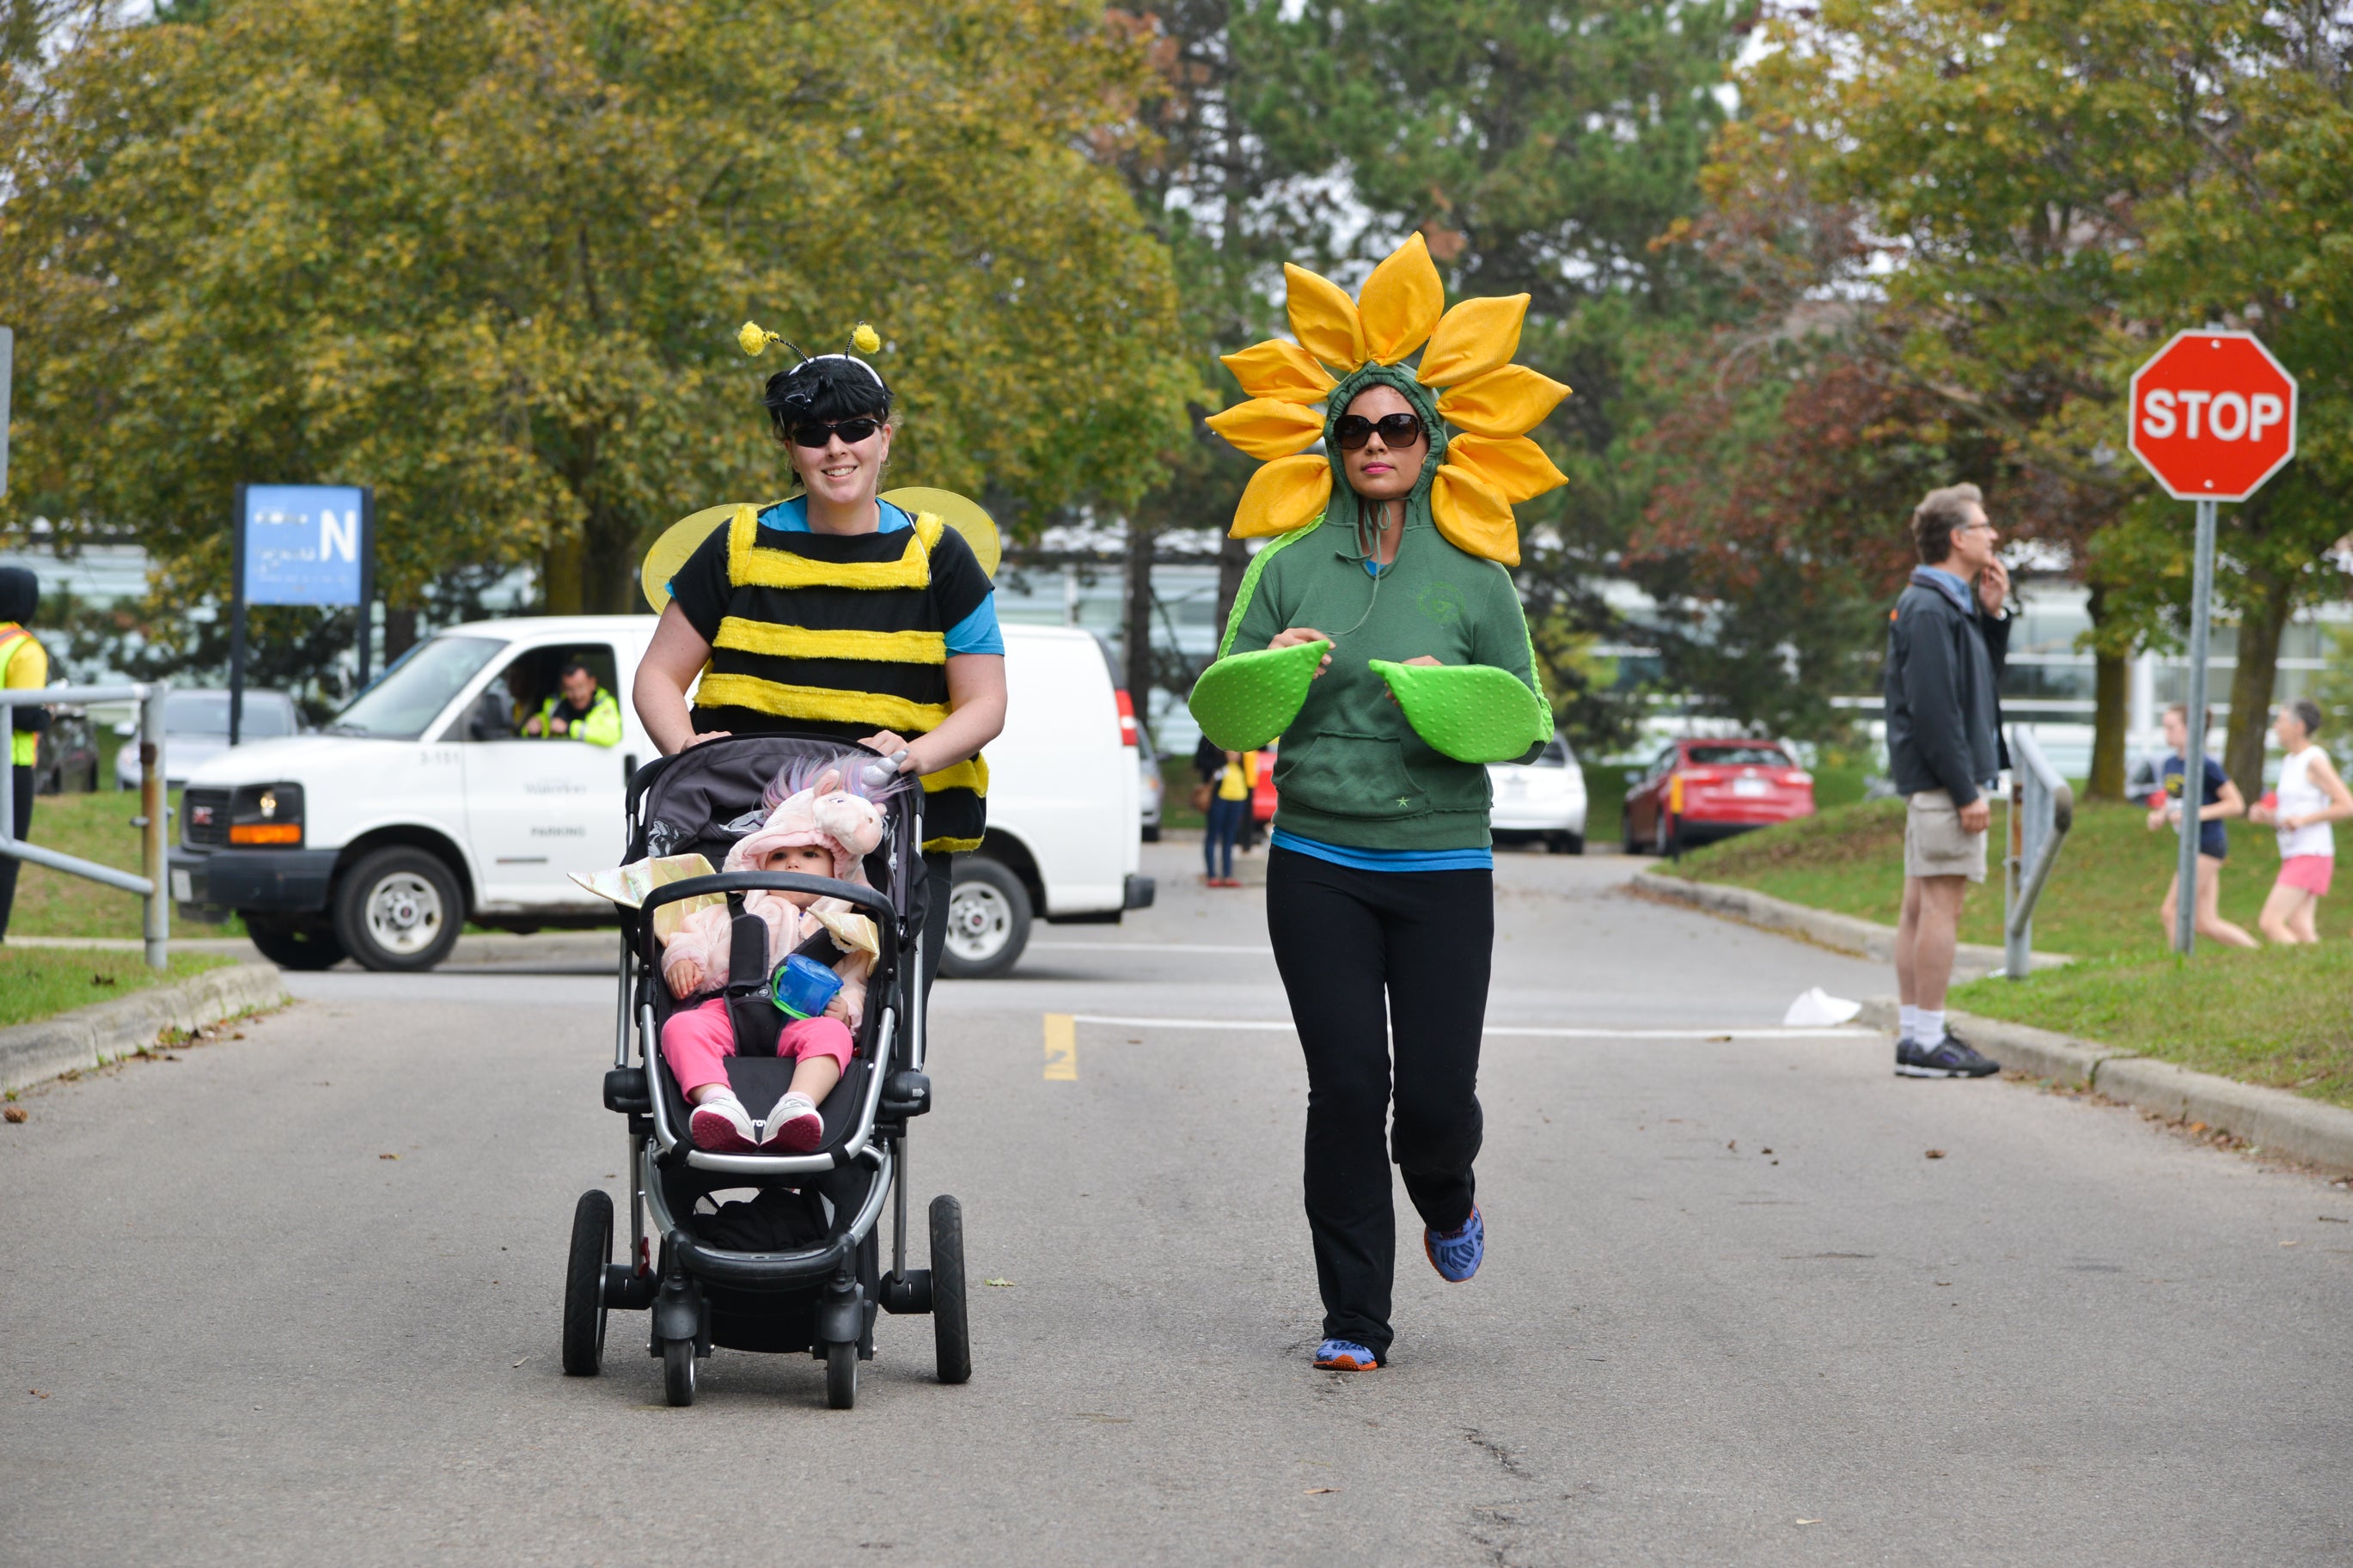 Lady in a bee suit pushing her daughter in a carriage while another lady dressed as a flowe runs beside her.